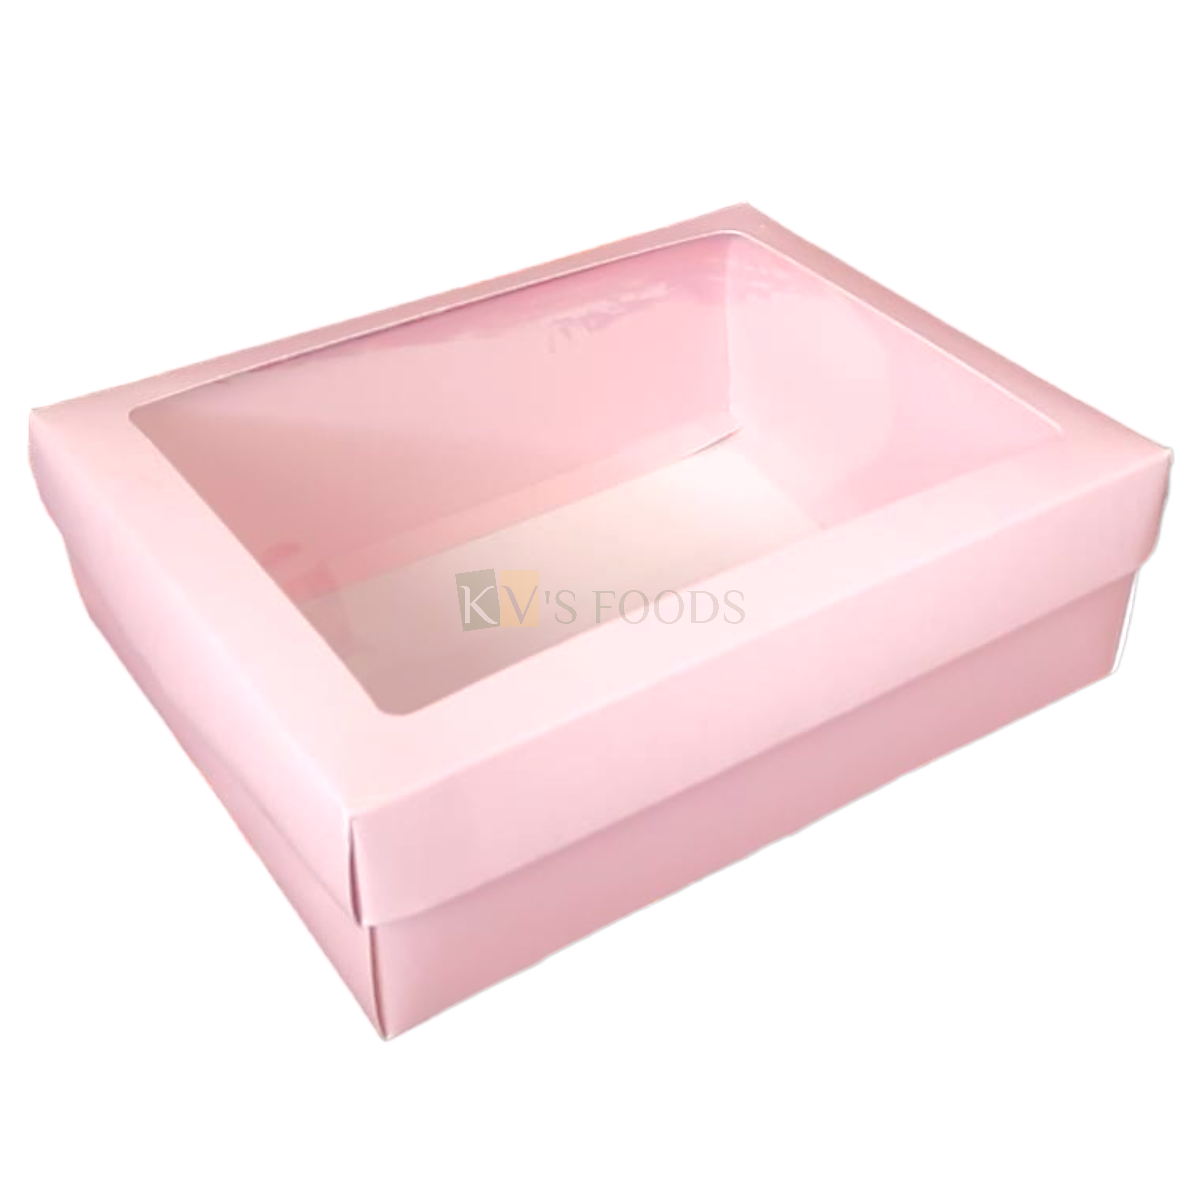 1 PC Pastel Light Pink Colour Multipurpose Chocolate Hamper Box with Transparent Window Box Size 10.3*8.3*3.1 Inch for Sweets, Dryfruit, Candies, Truffles, Muffins Doughnuts, Jars upto 250 ML